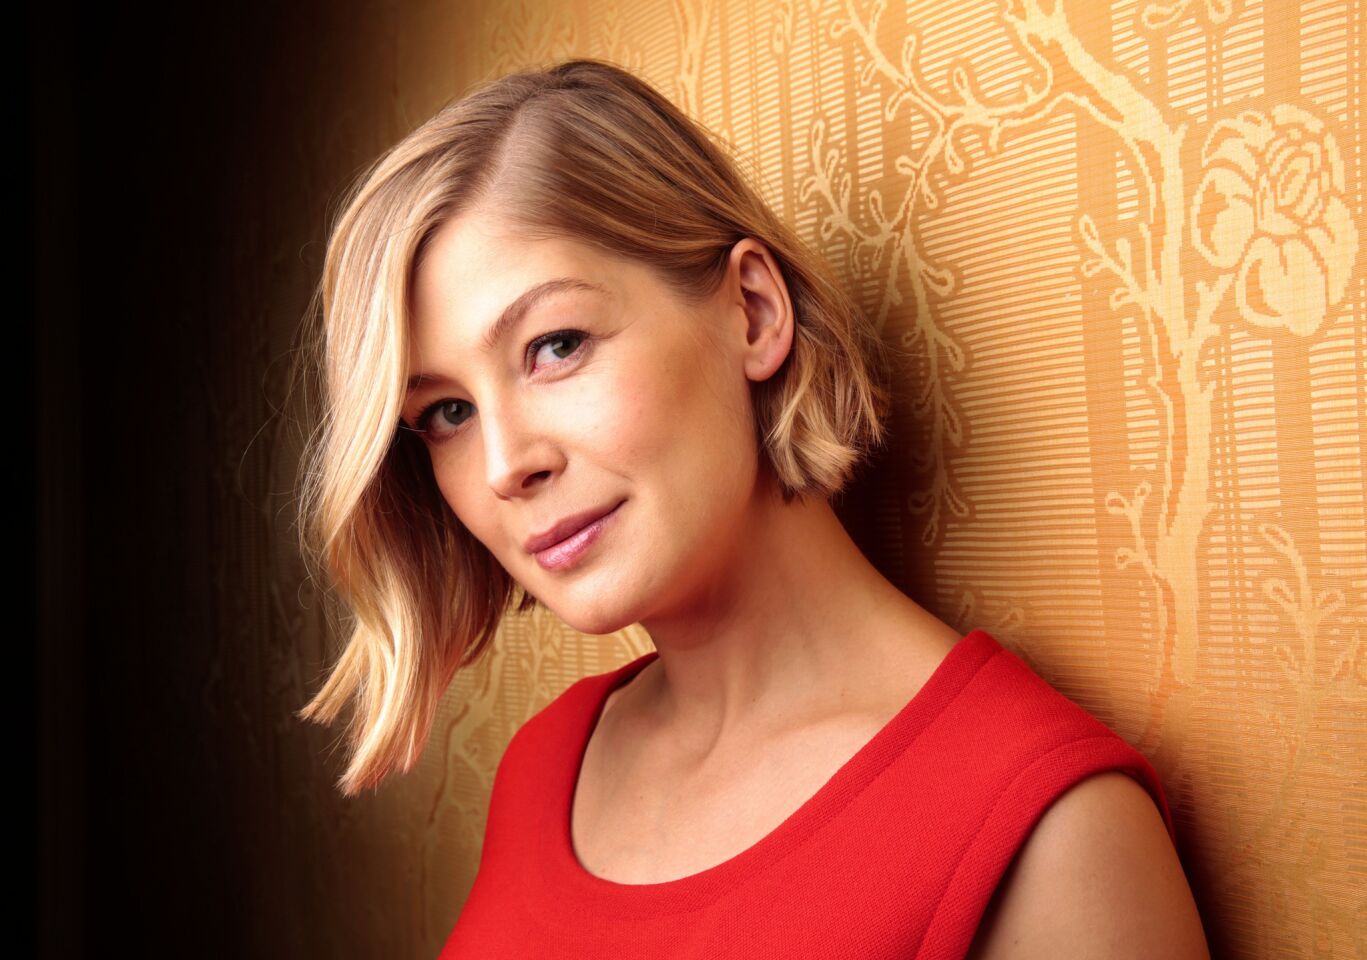 "Gone Girl" actress Rosamund Pike welcomed her second son with Robie Uniacke -- in her own home. The little one will join older brother of 2-1/2 years, named Solo.